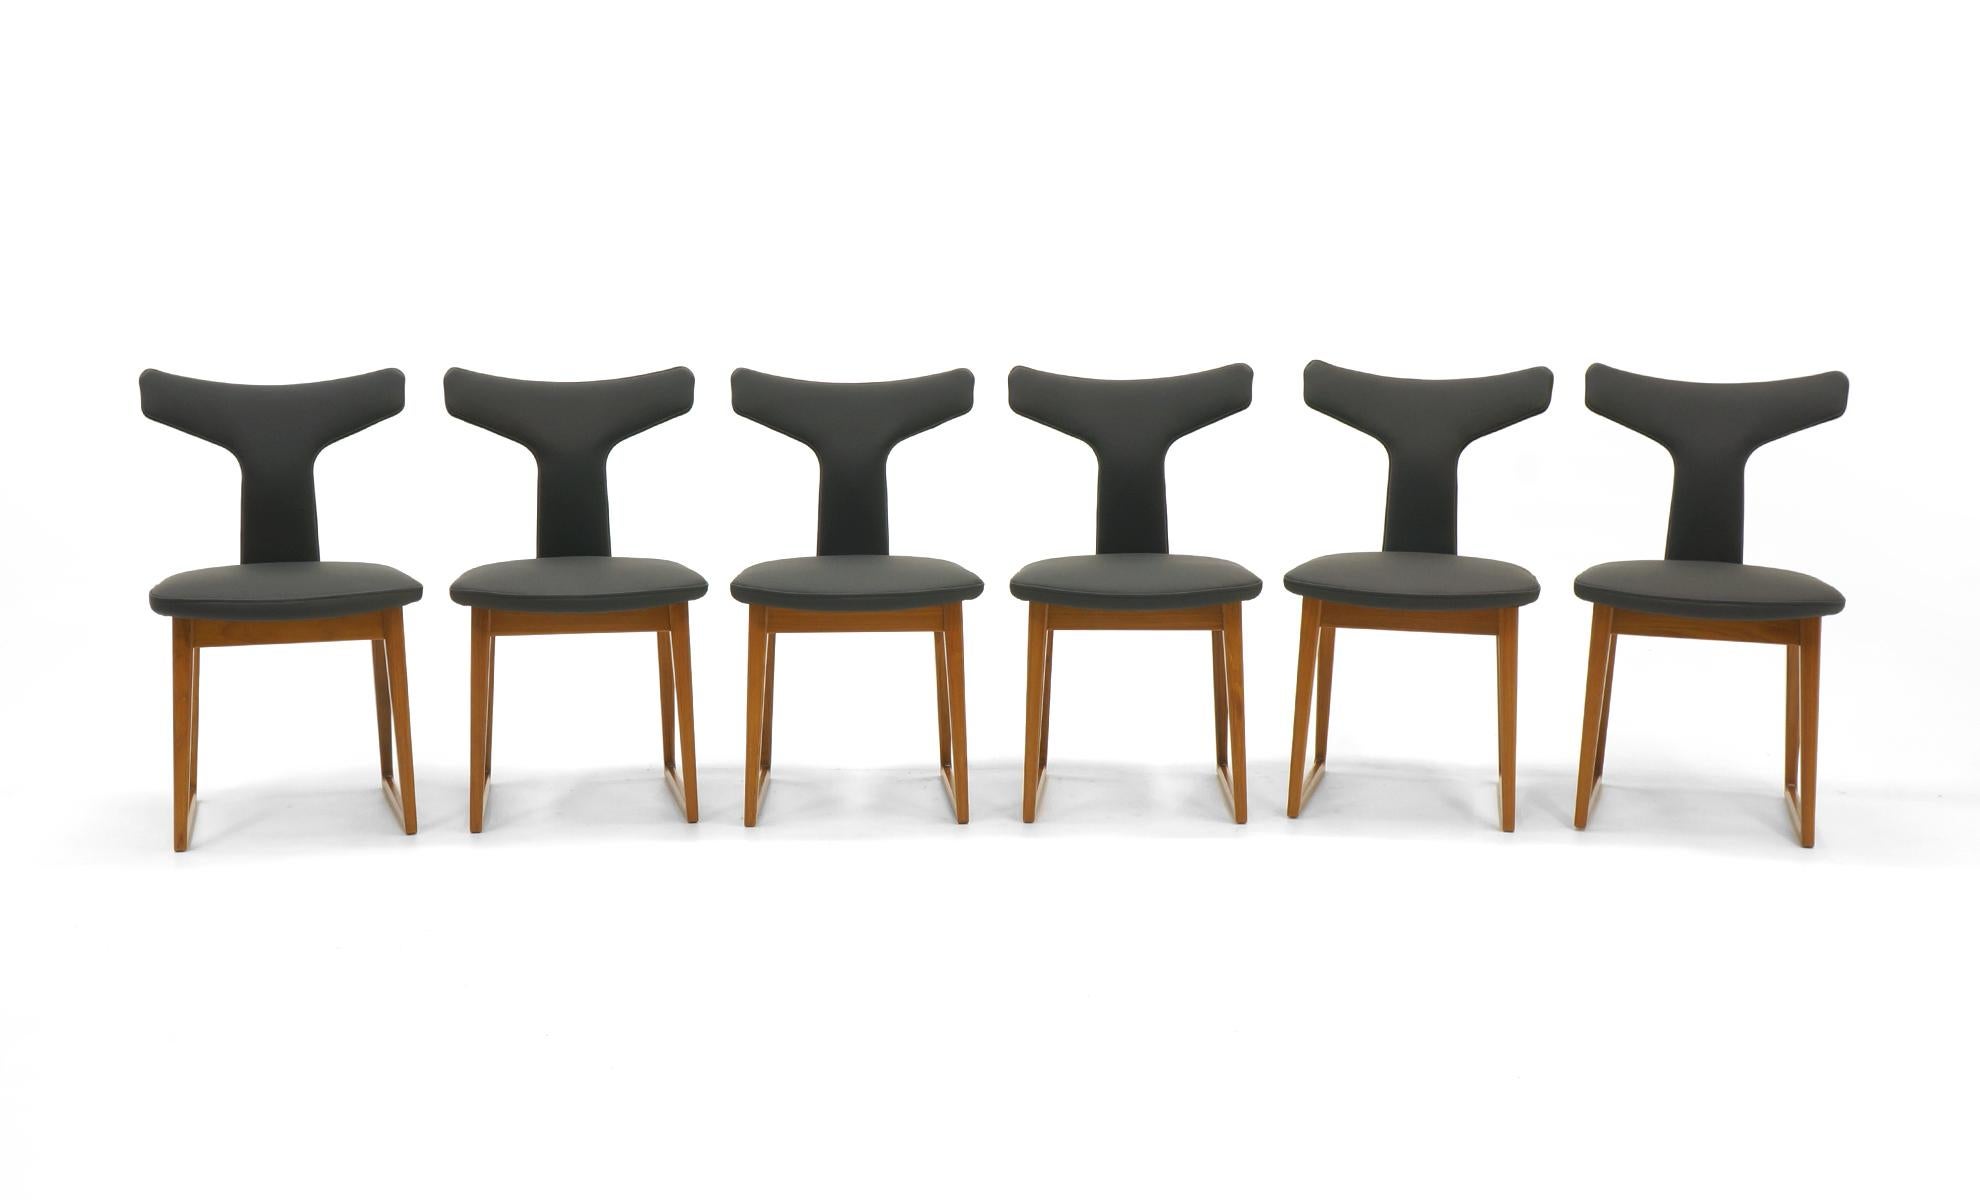 Very rare set of 6 dining chairs designed by Arne Vodder and made by Sibast, Denmark. Sibast was one of the finest makers of Danish modern design. We have fully restored this set including new black leather upholstery and expertly refinished teak